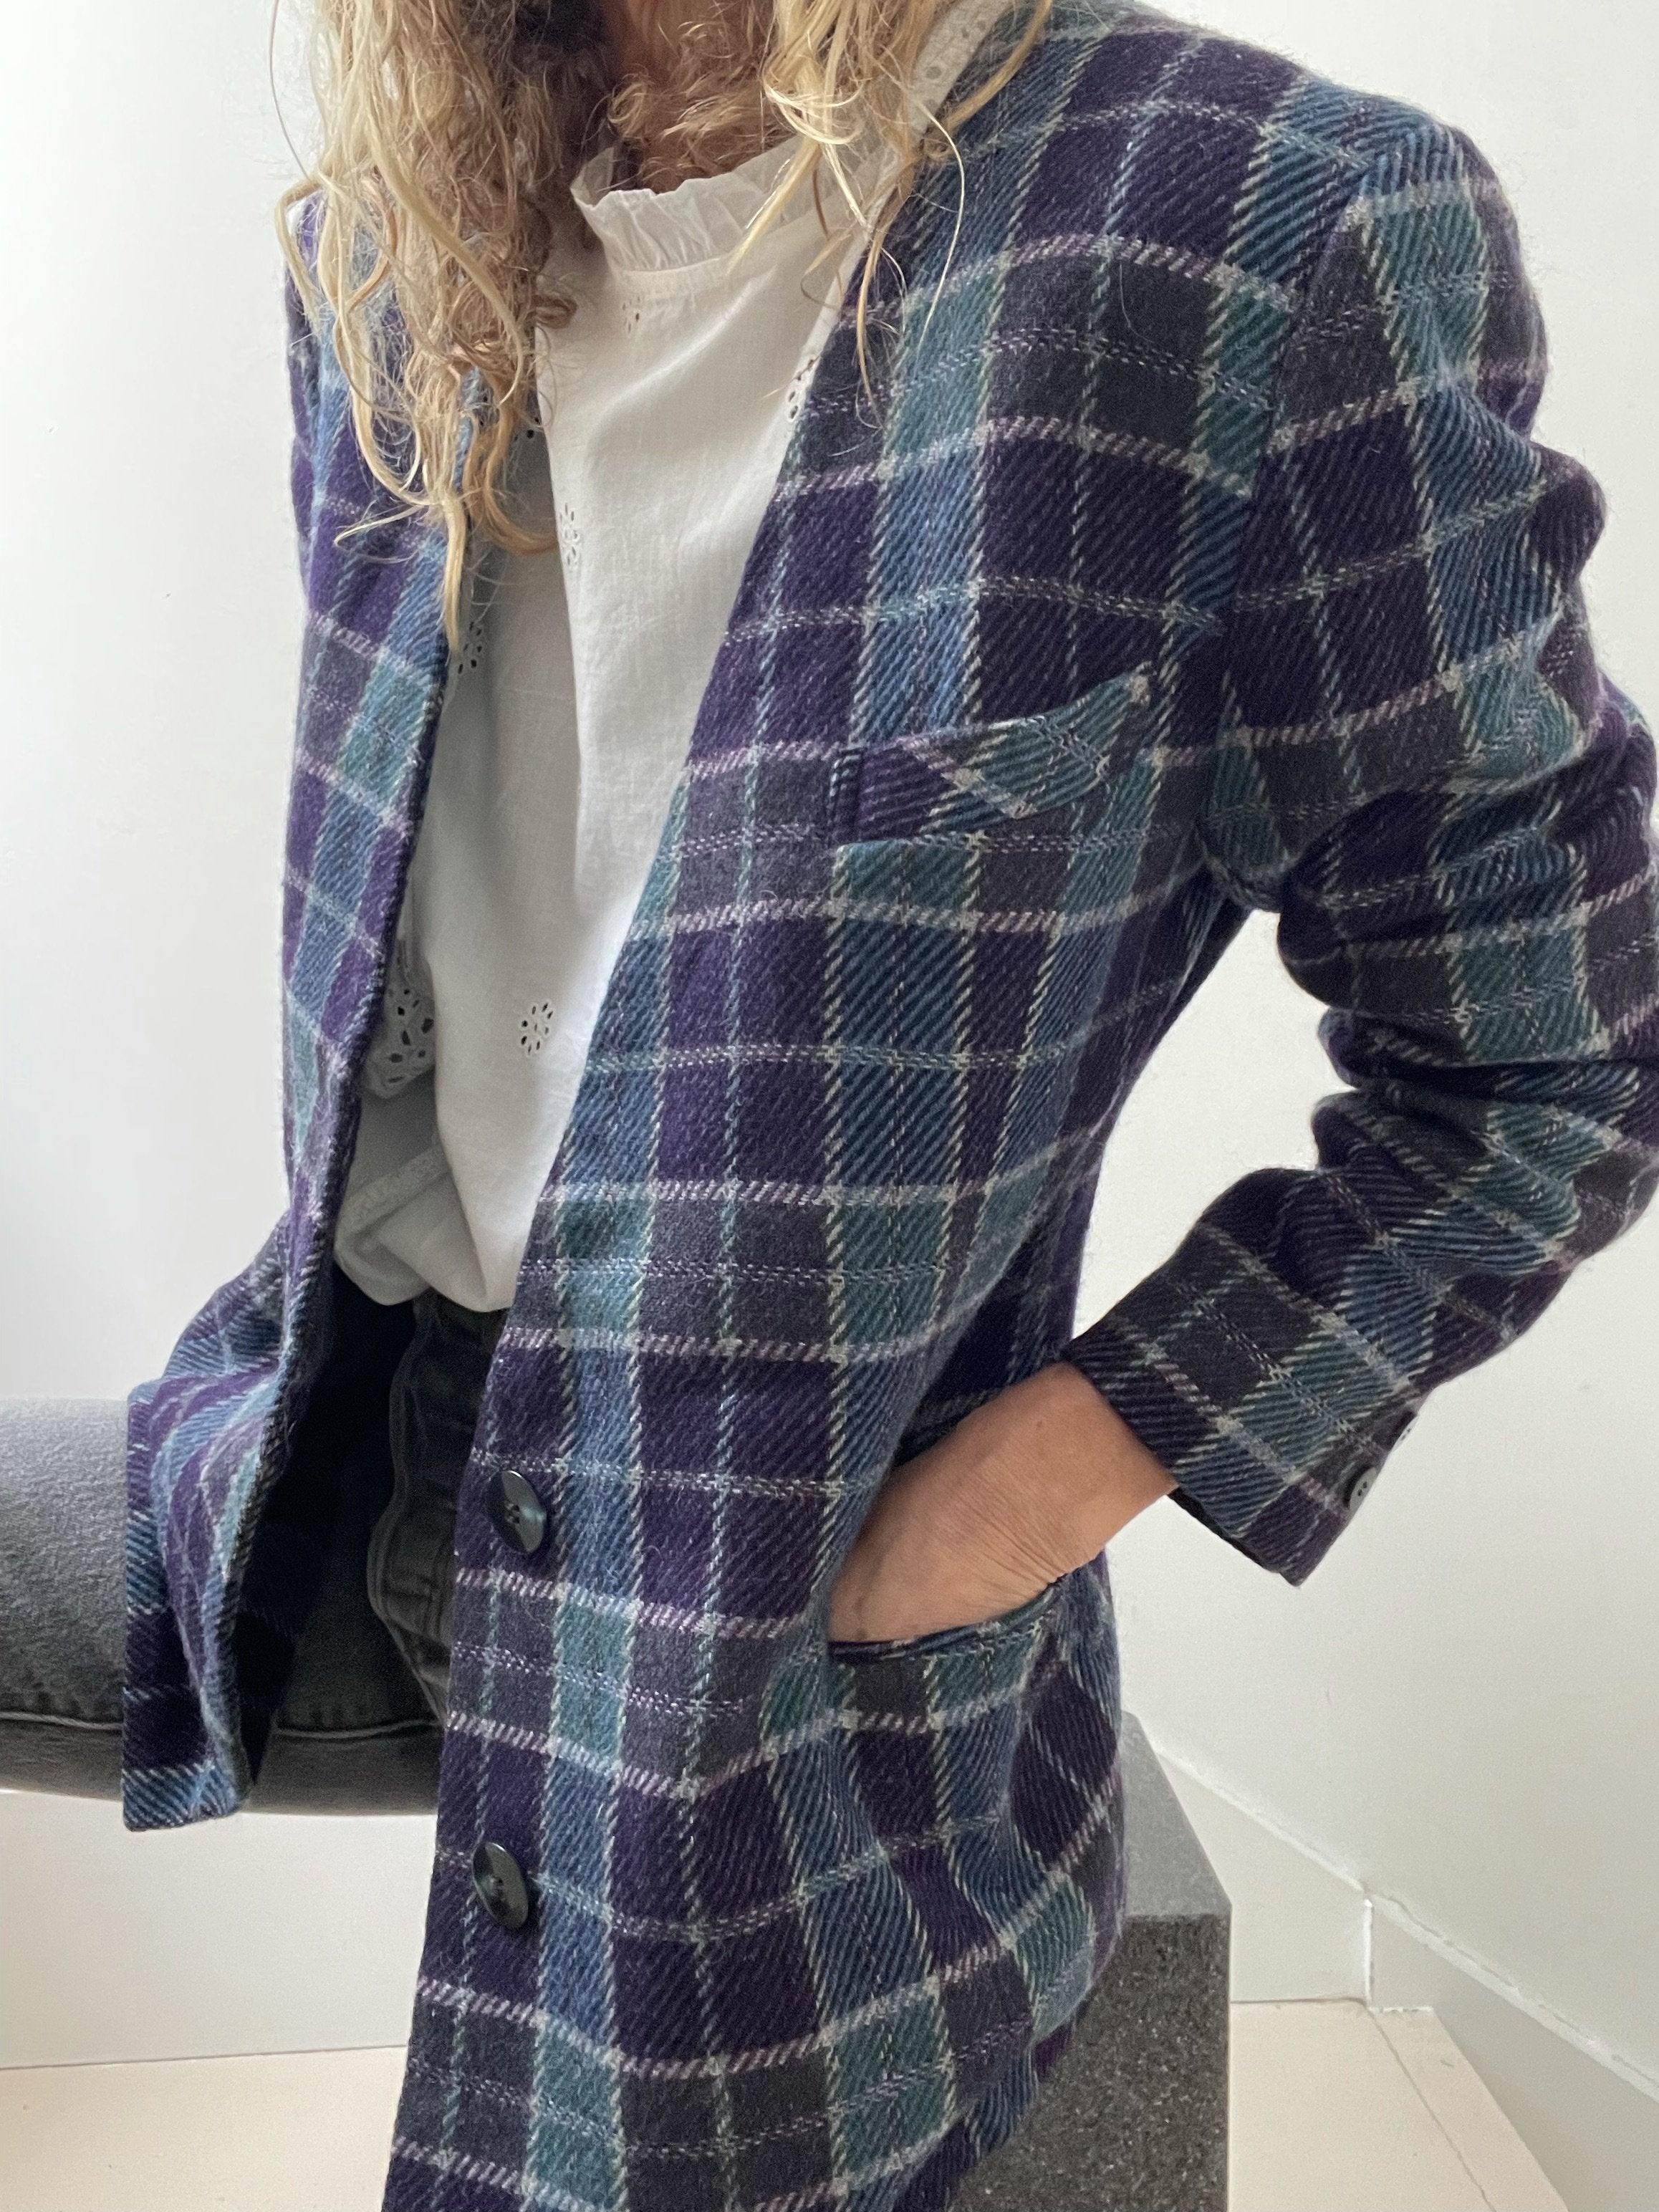 Not specified Jackets Medium Vintage Coloured Checked Blazer